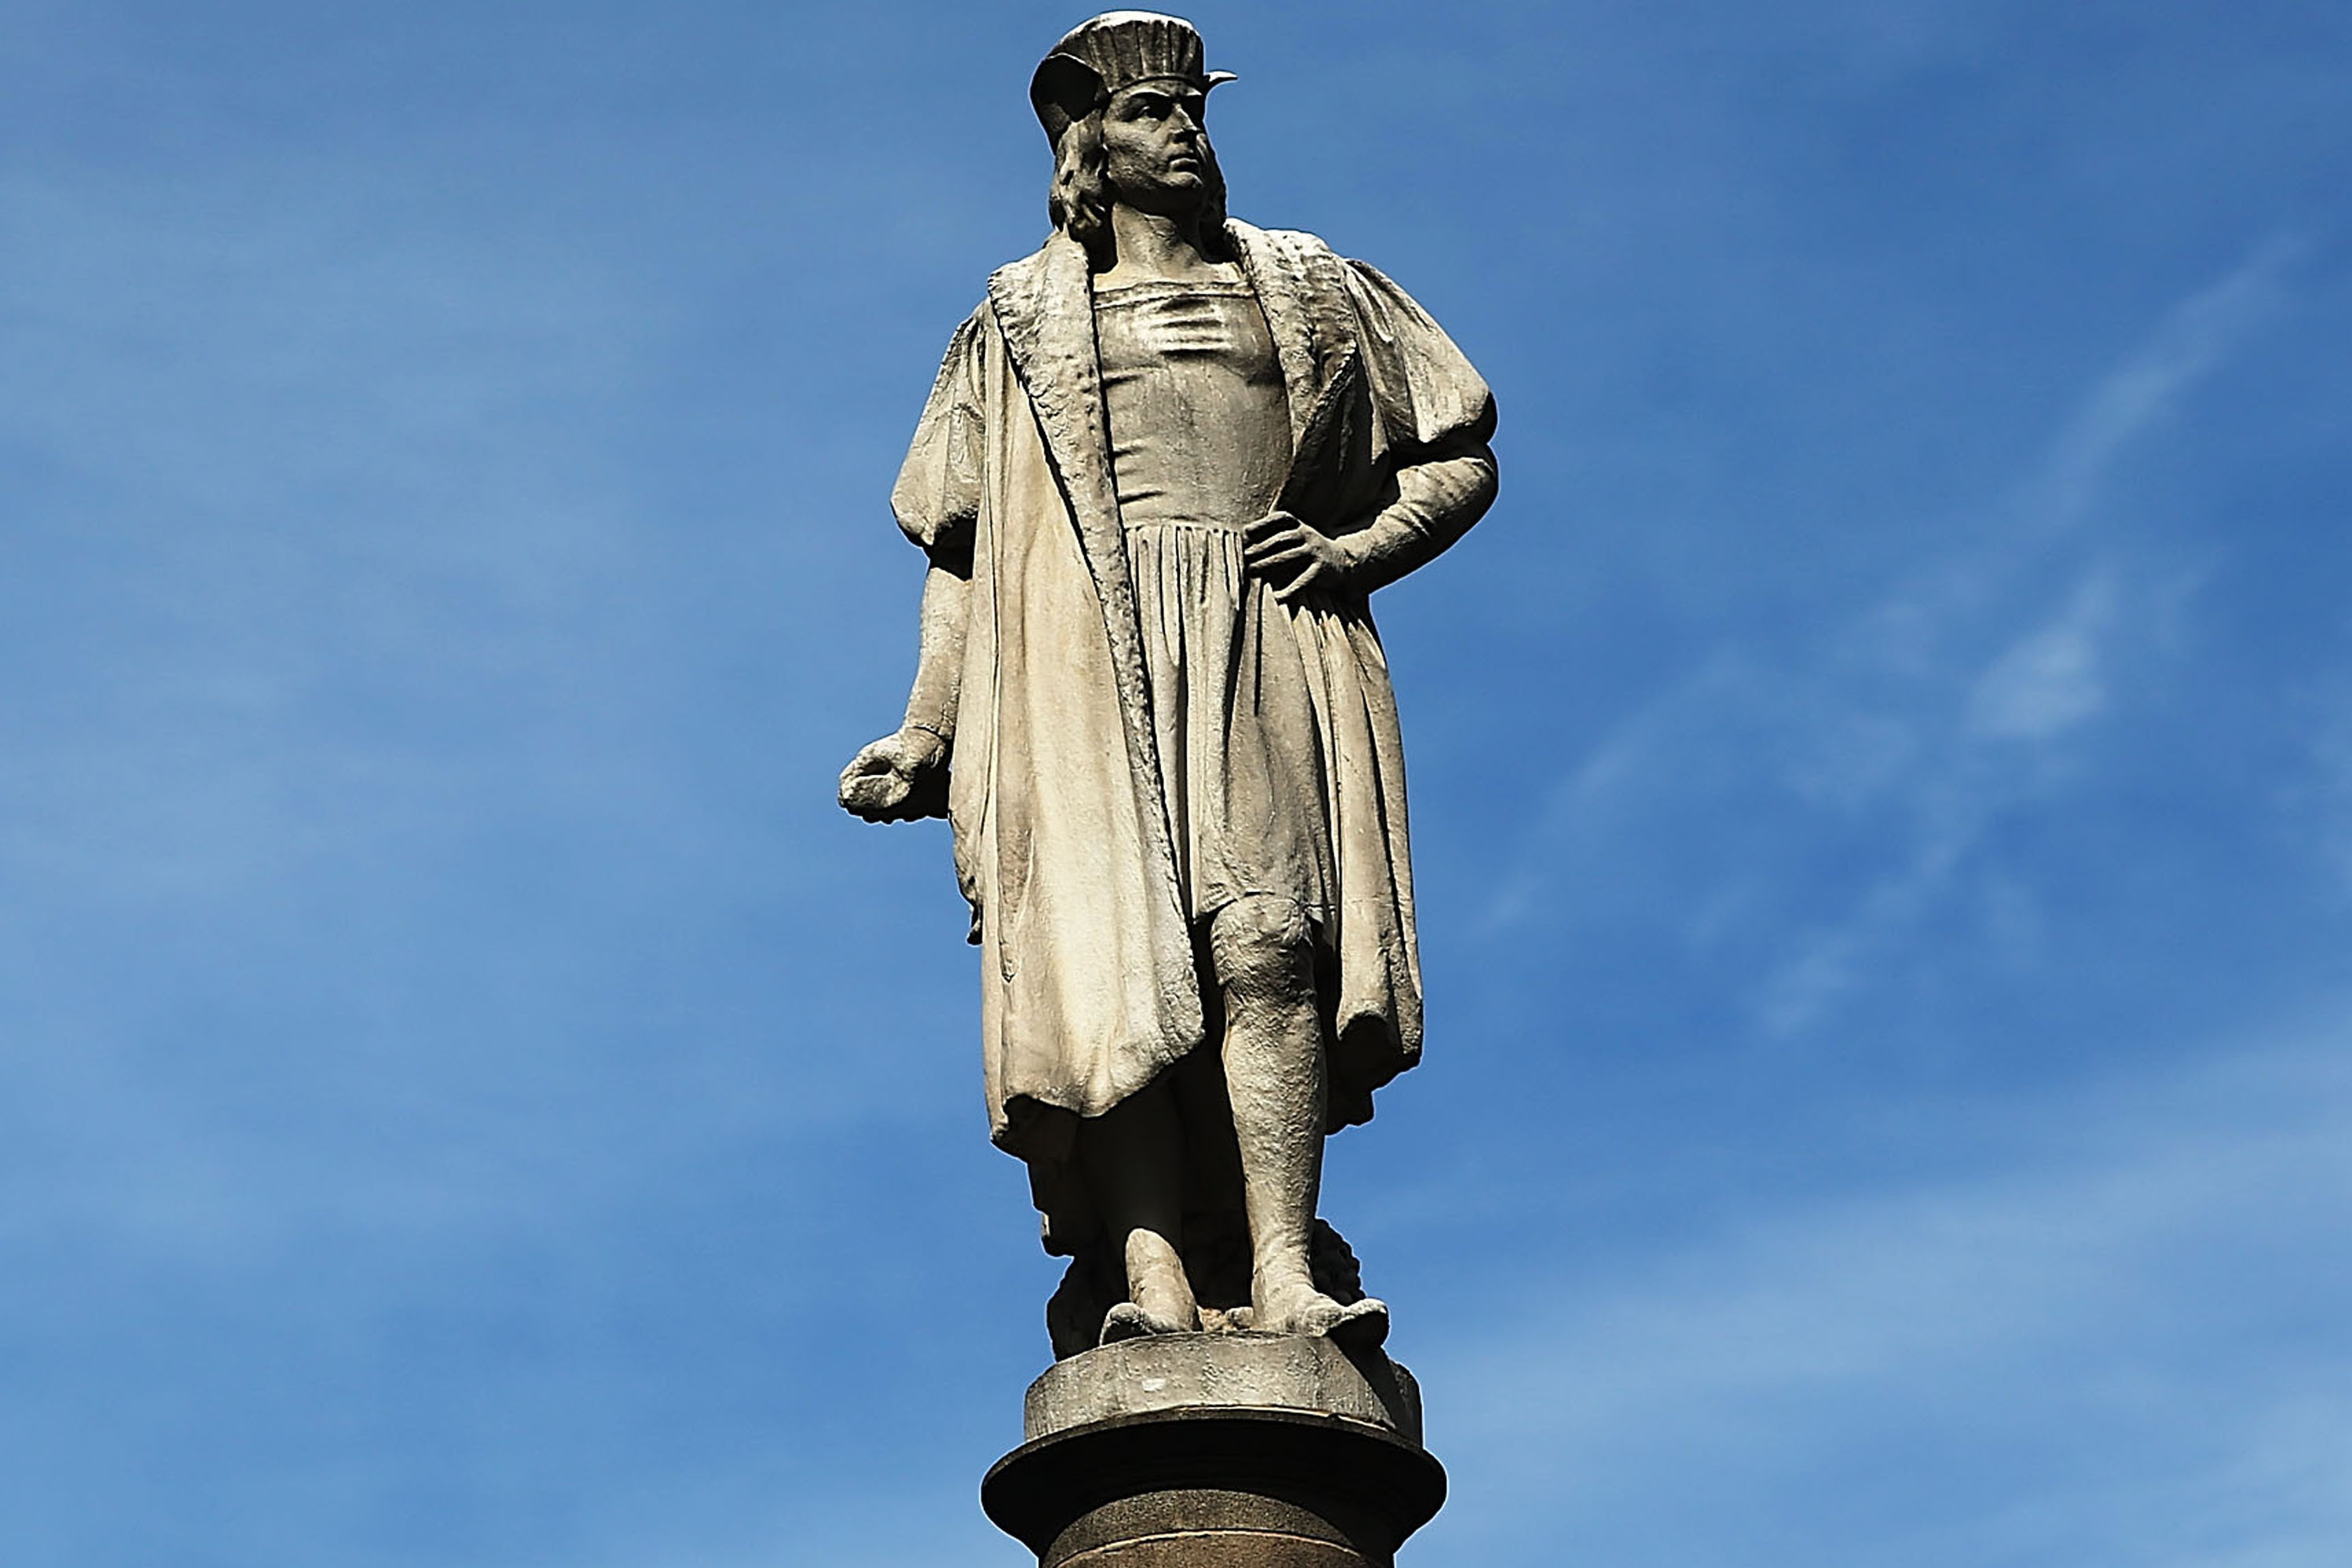 Statue of Christopher Columbus at Columbus Circle in New York.